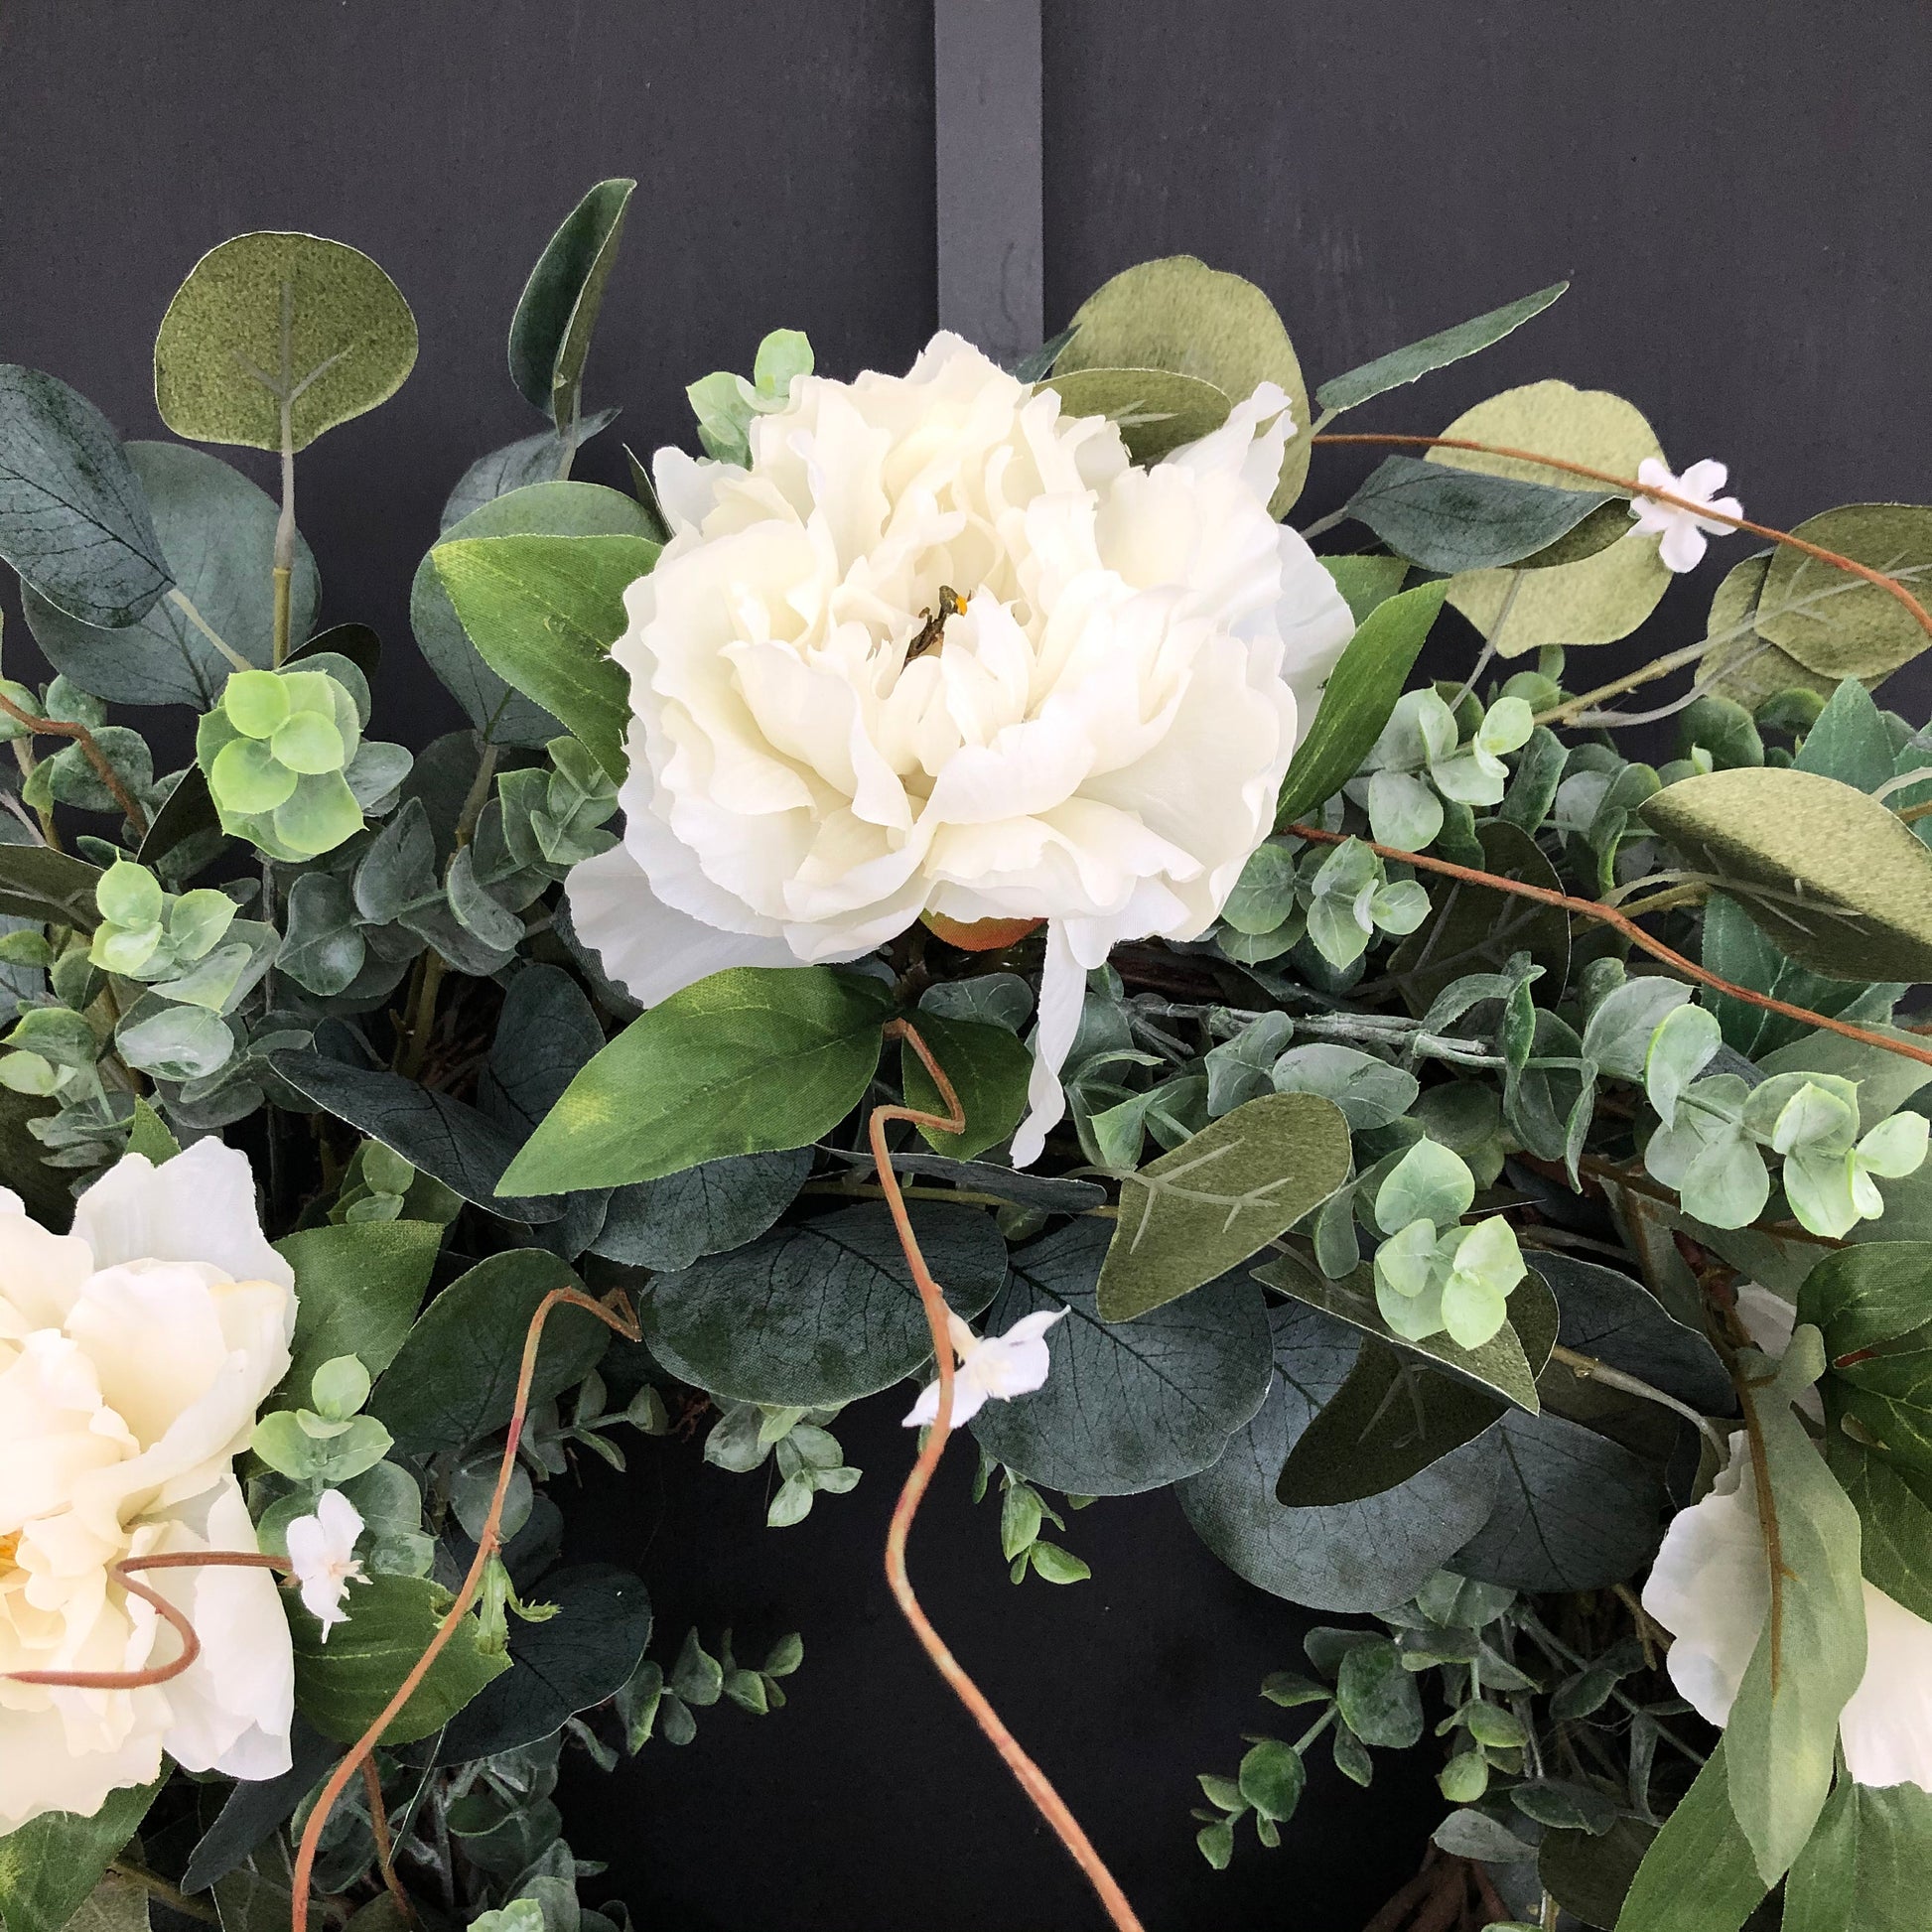 Spring Wreath for Front Door, Peony and Eucalyptus Wreath - Ash & Hart Floral